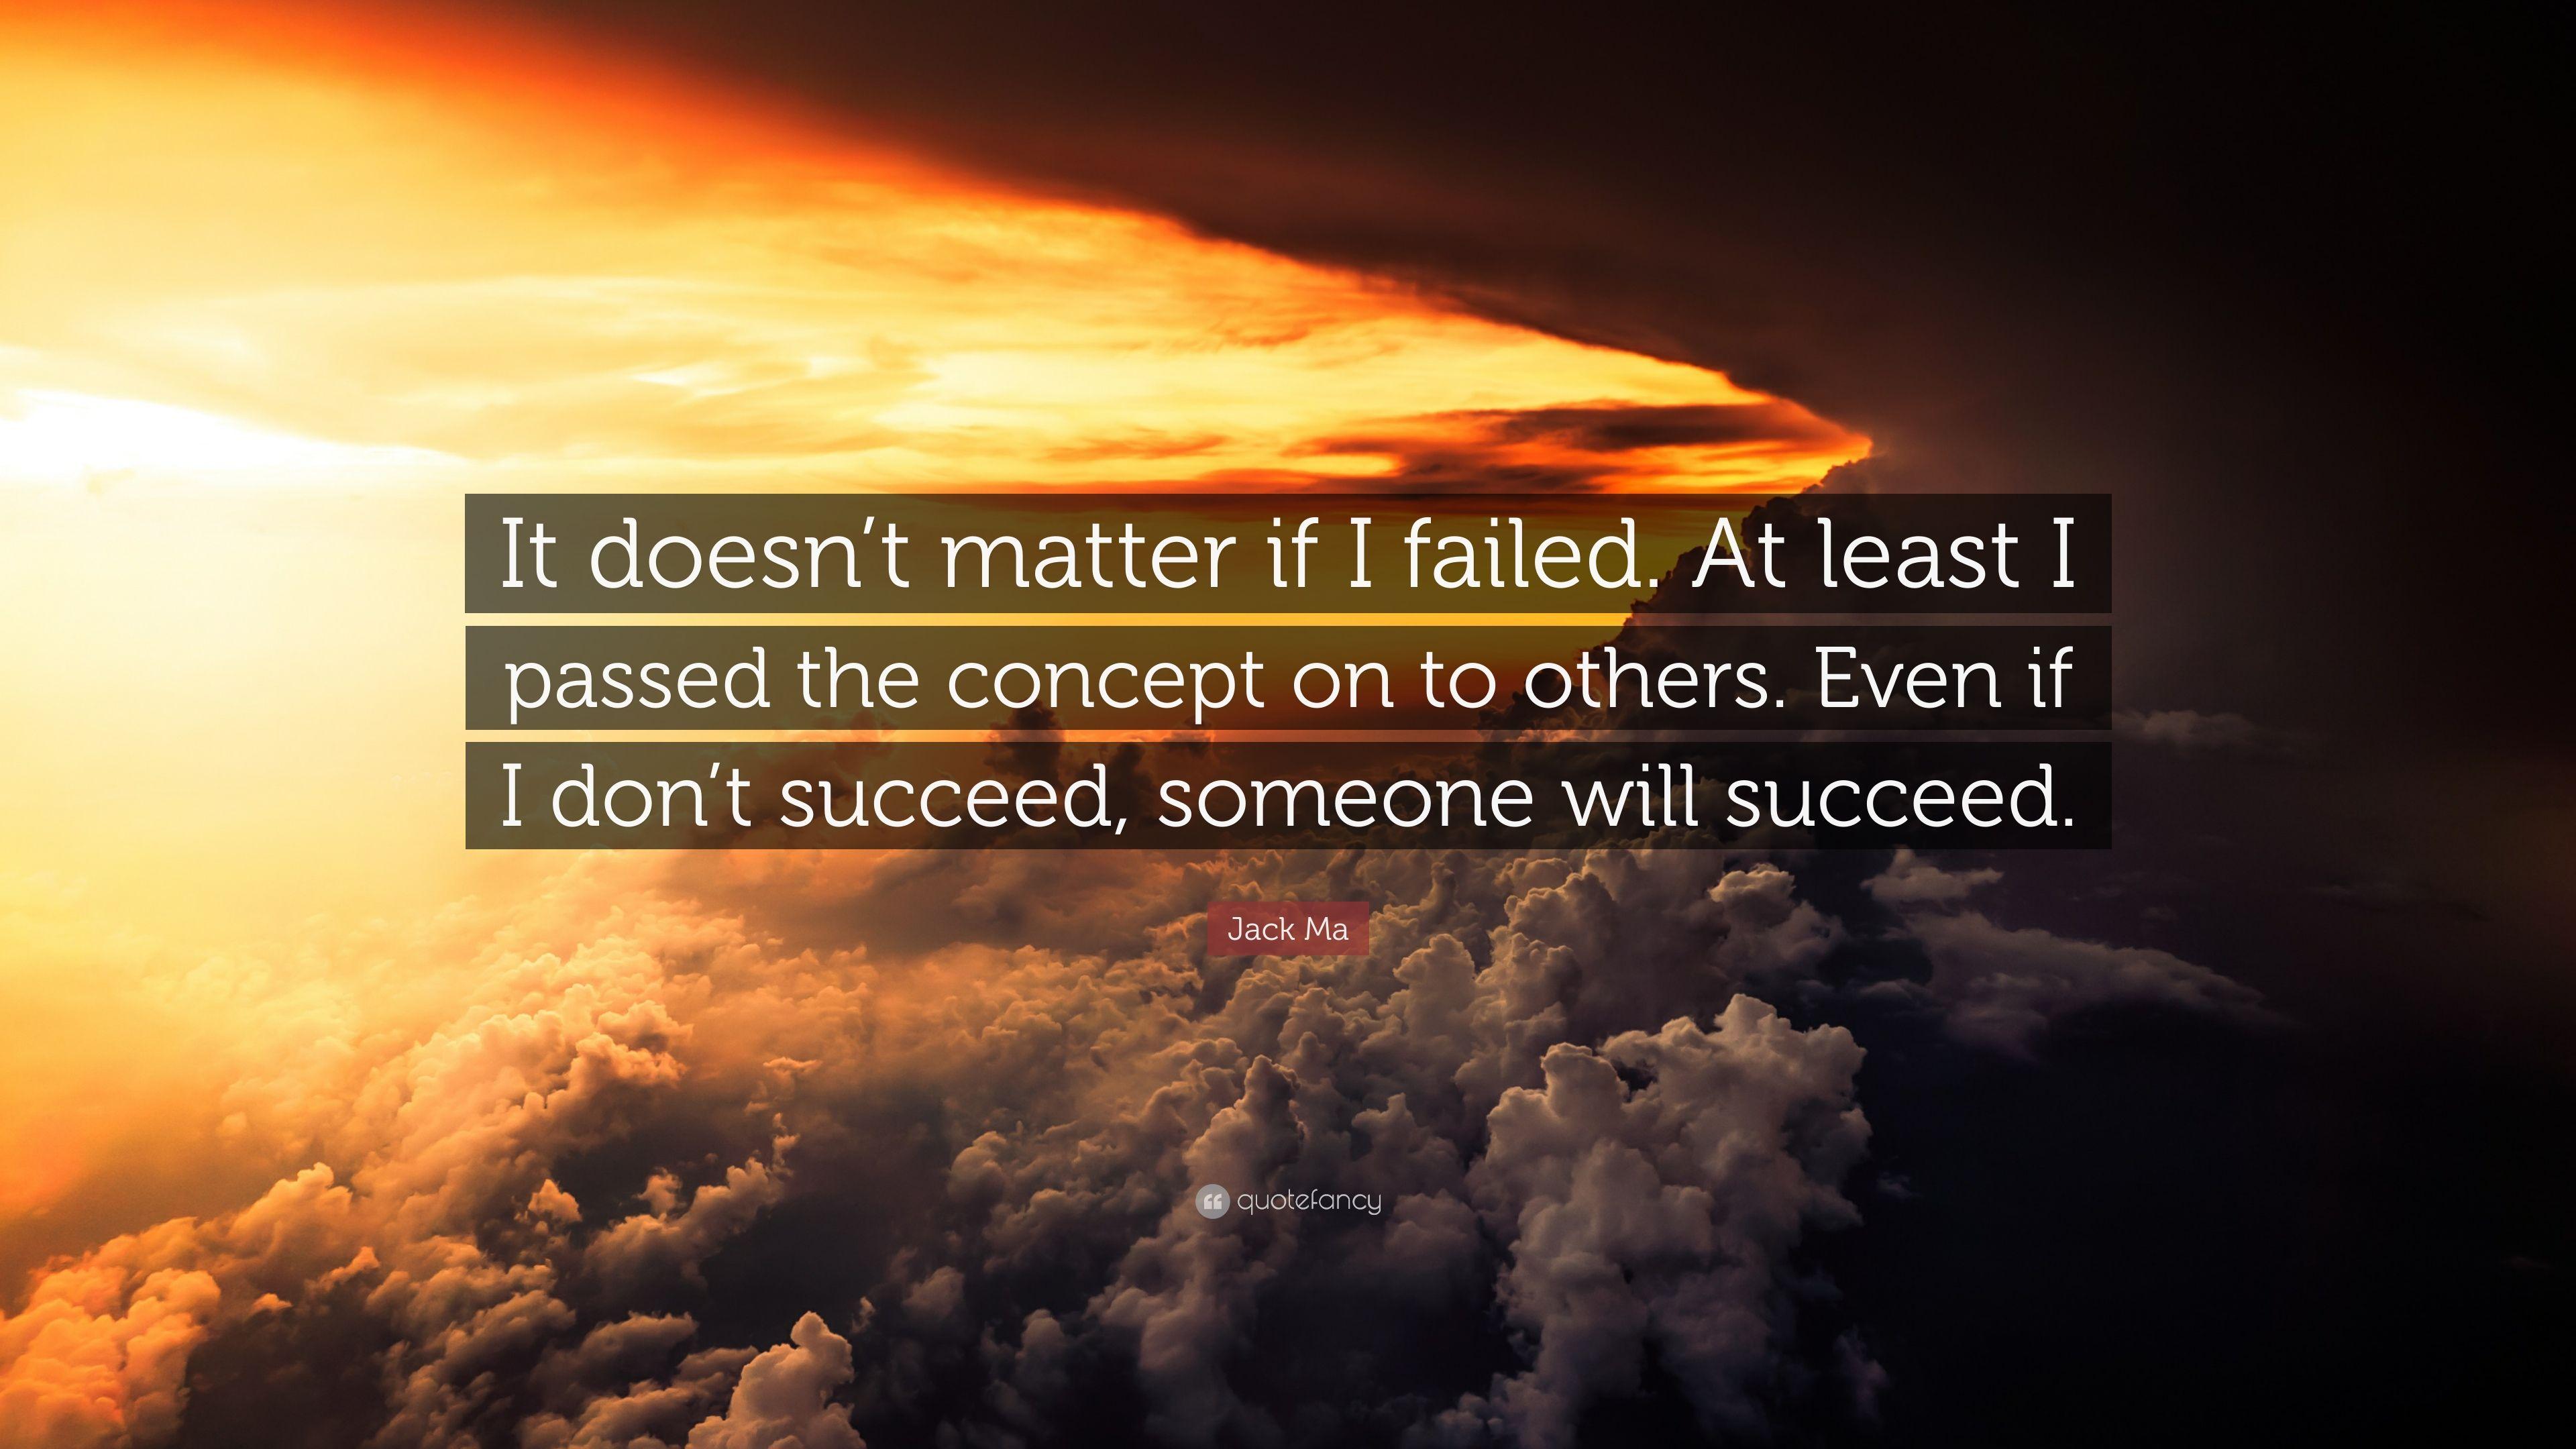 Jack Ma Quote: “It doesn't matter if I failed. At least I passed